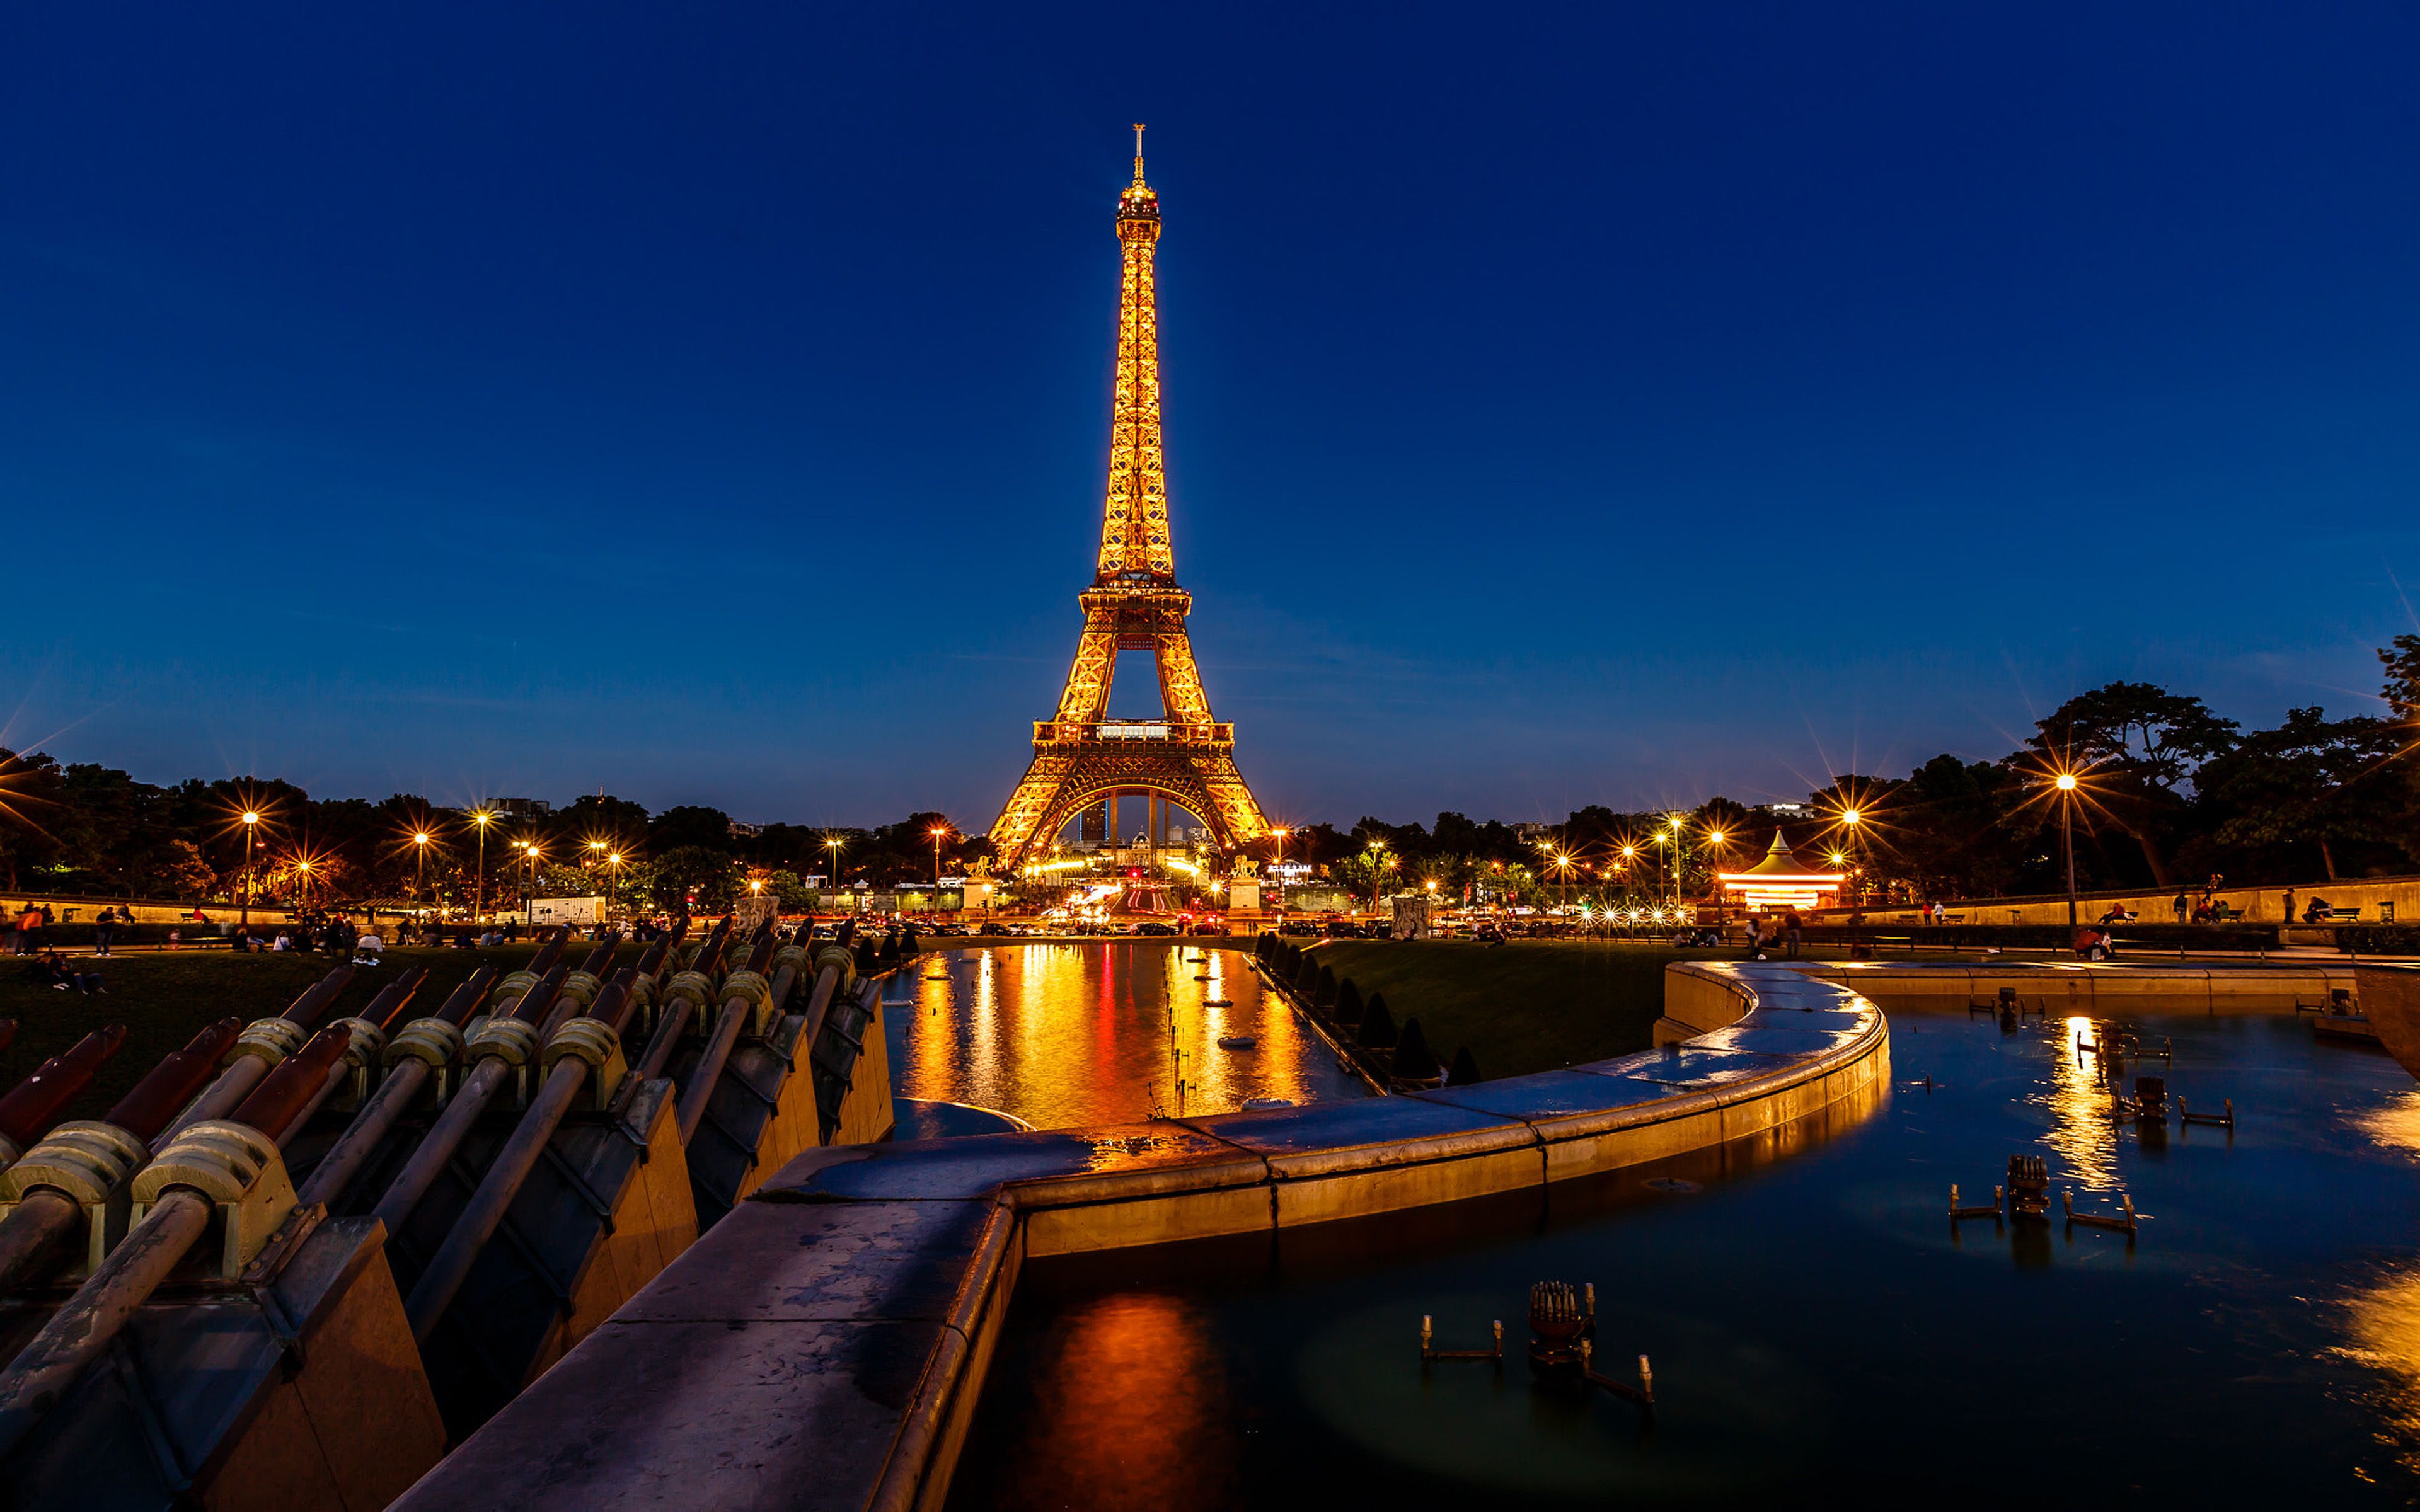 Trocadero Fountains In The Evening And Eiffel Tower Paris France